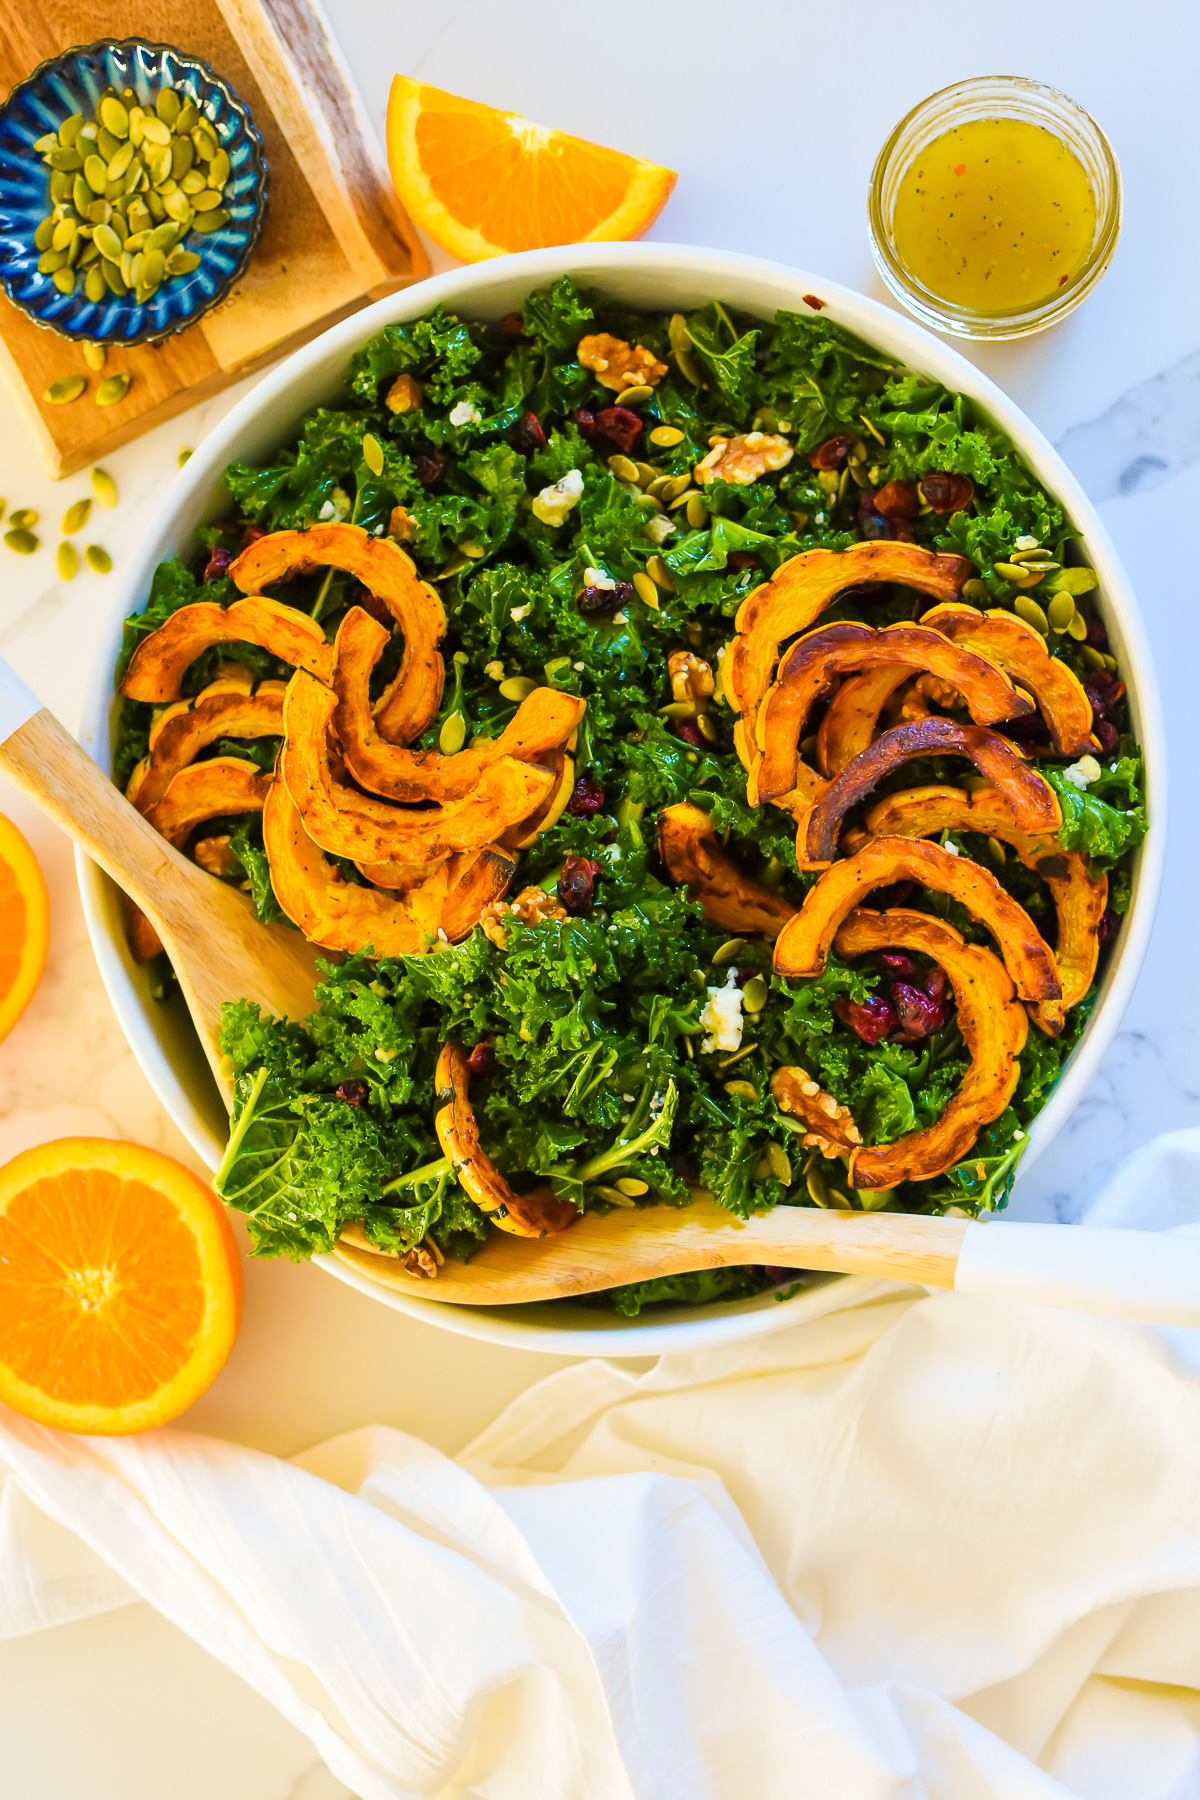 autumn harvest kale salad with roasted delicata squash, cranberries, walnuts, pumpkin seeds, and blue cheese is tossed in an orange maple vinaigrette and serve in a large white bowl perfect for Thanksgiving dinner.